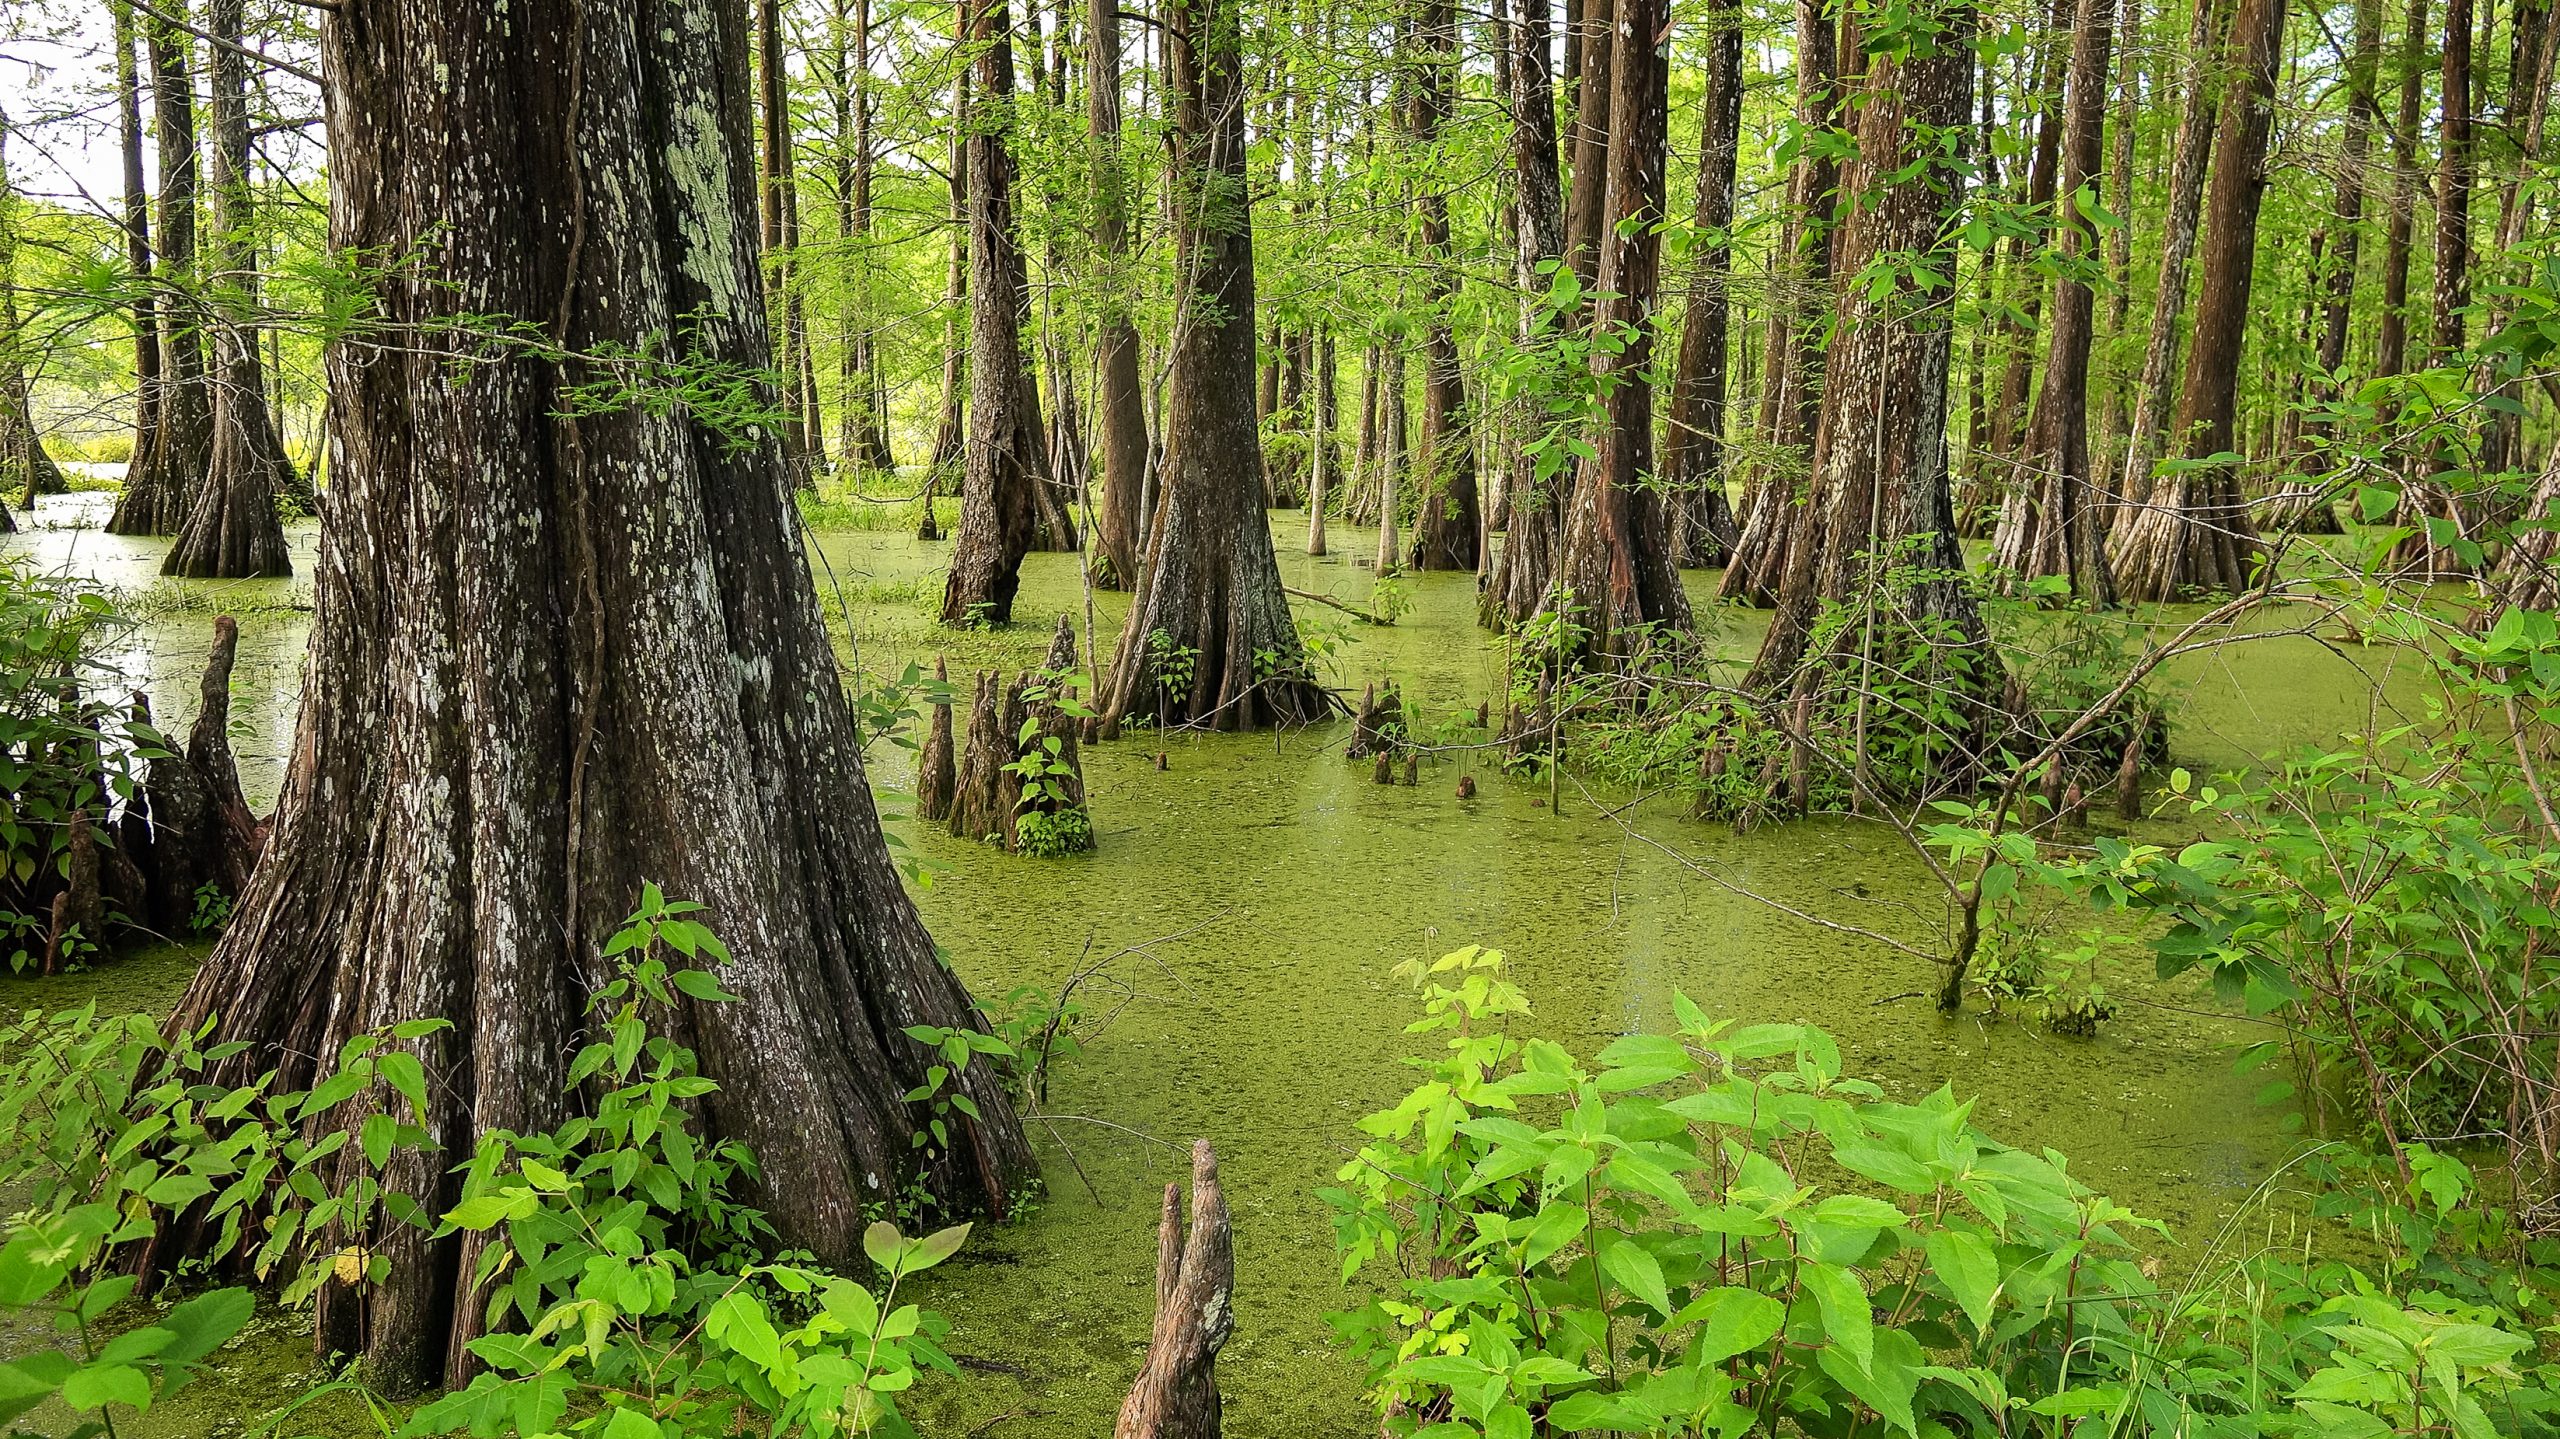 9 Facts You Didn't Know About Wetland Forests